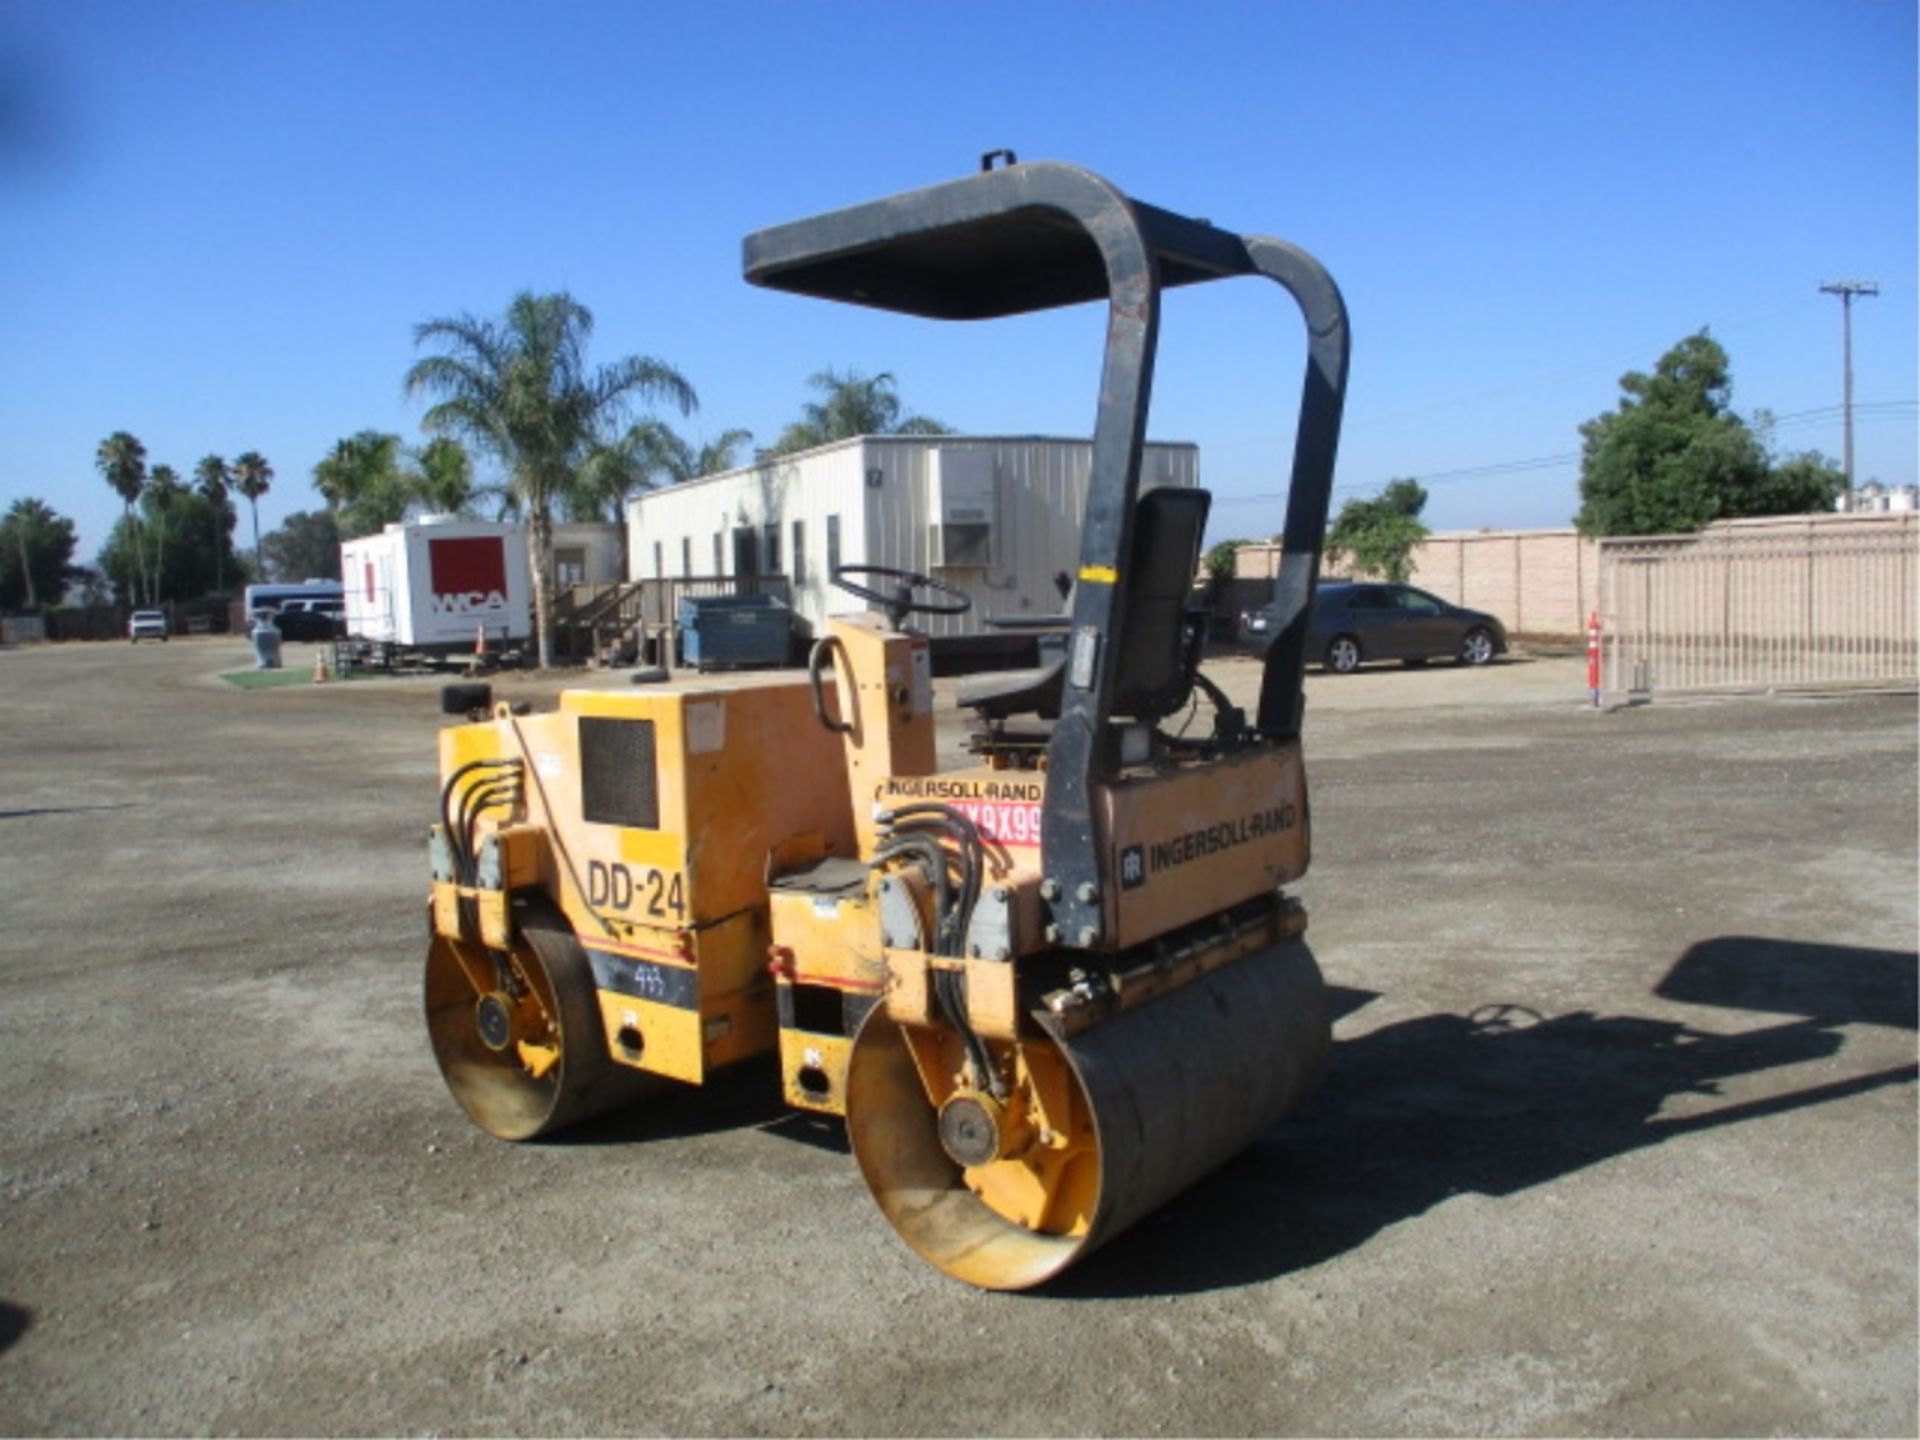 Ingersoll-Rand DD-24 Vibratory Roller, Hatz Diesel, 48" Drums, Water System, Canopy, S/N: 146681, - Image 15 of 45